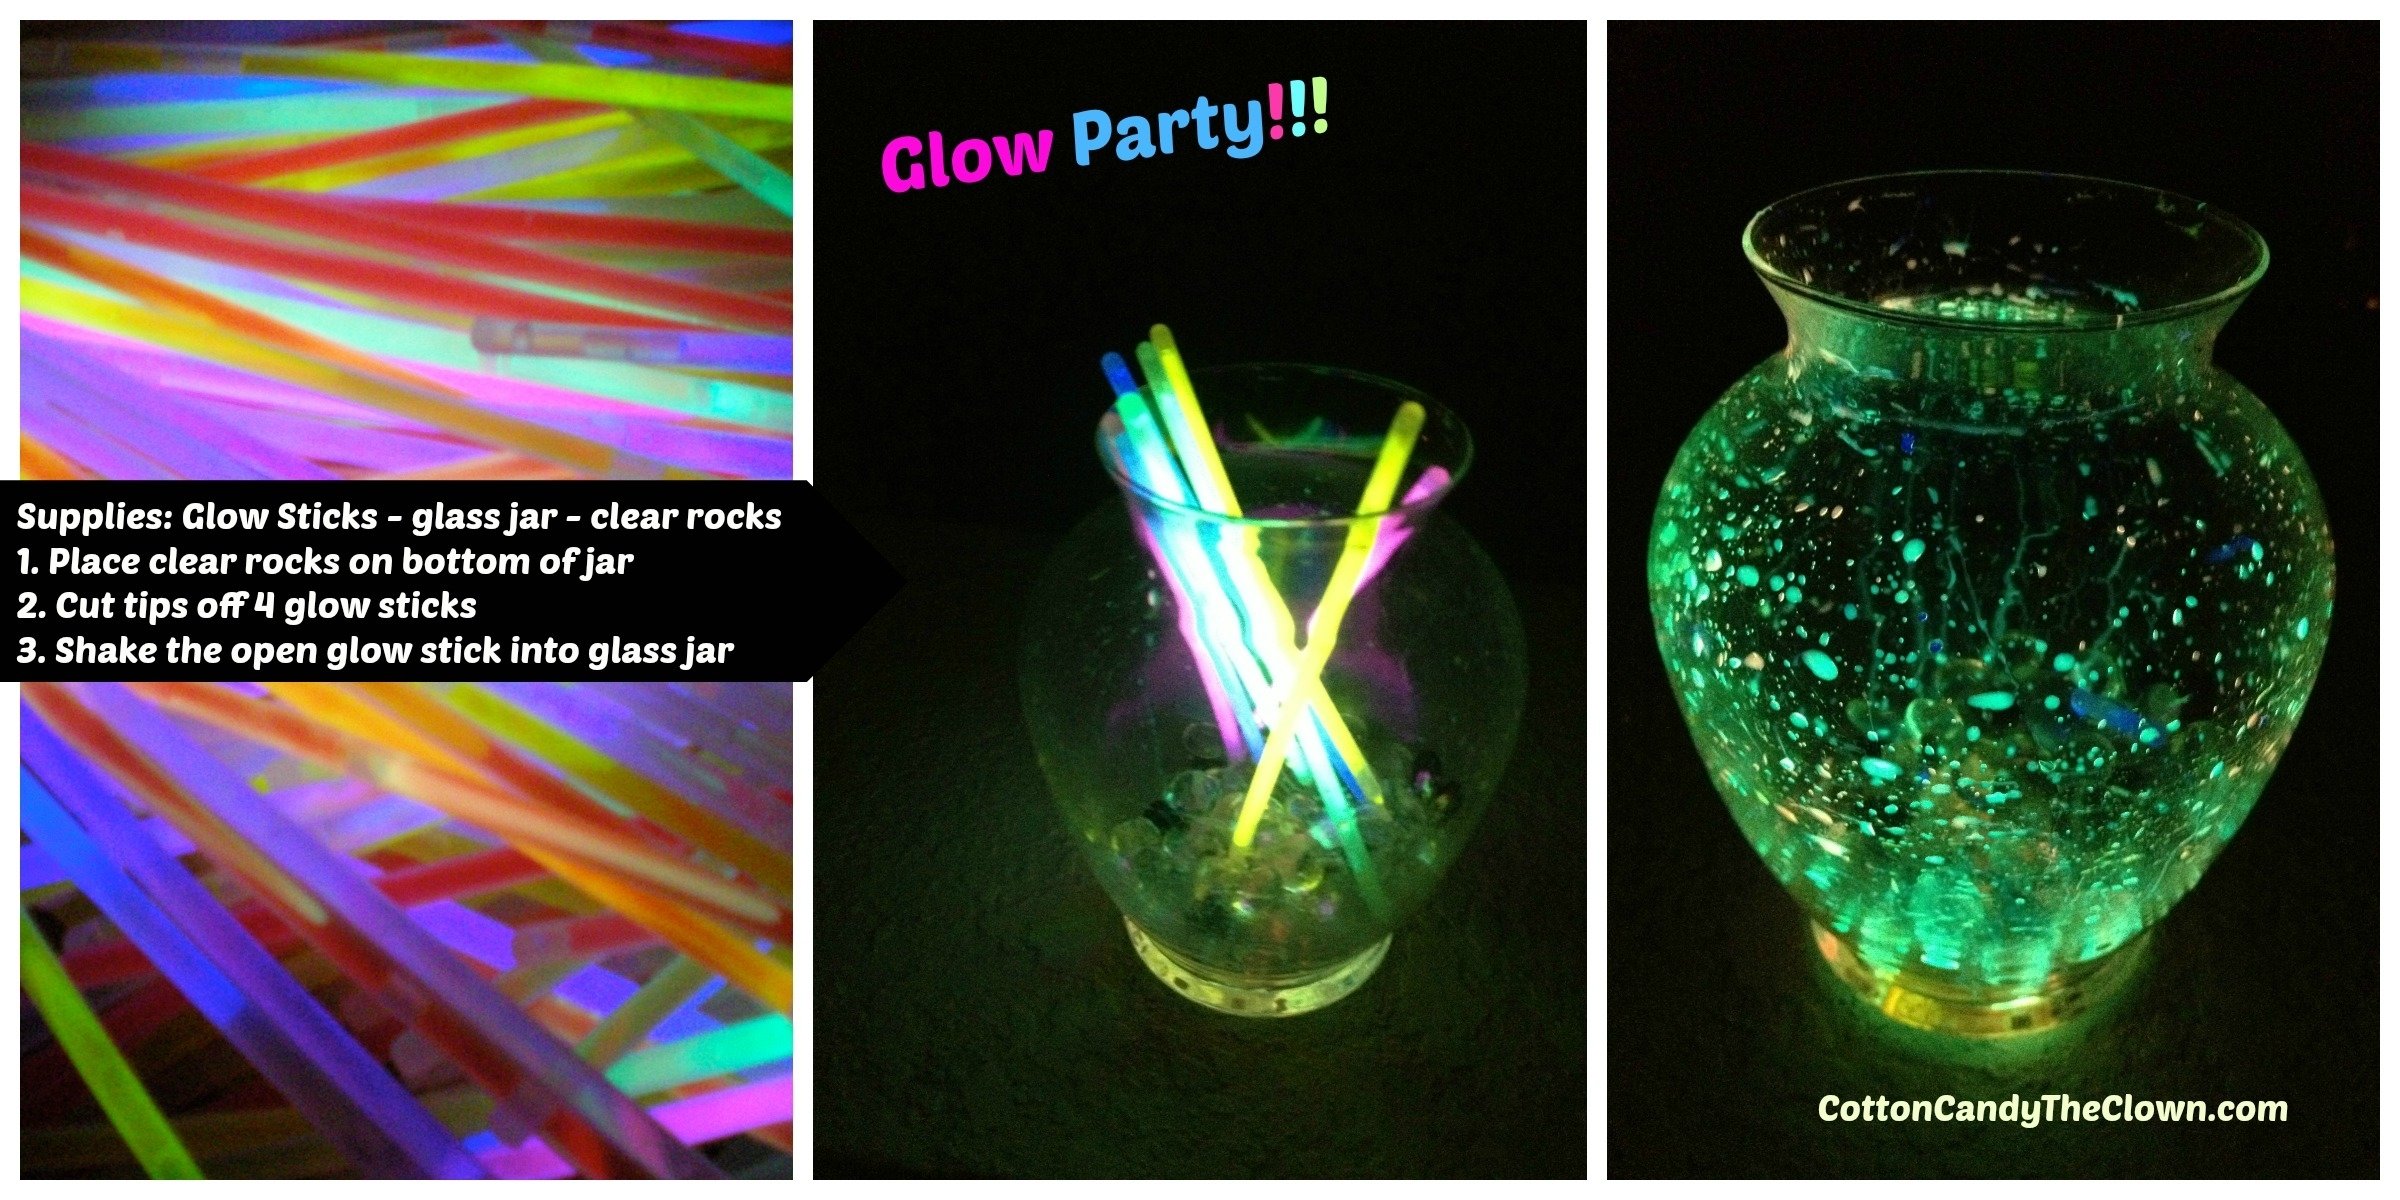 10 Great Cool Glow In The Dark Ideas glow in the dark party ideas cotton candy clown and company loversiq 2023